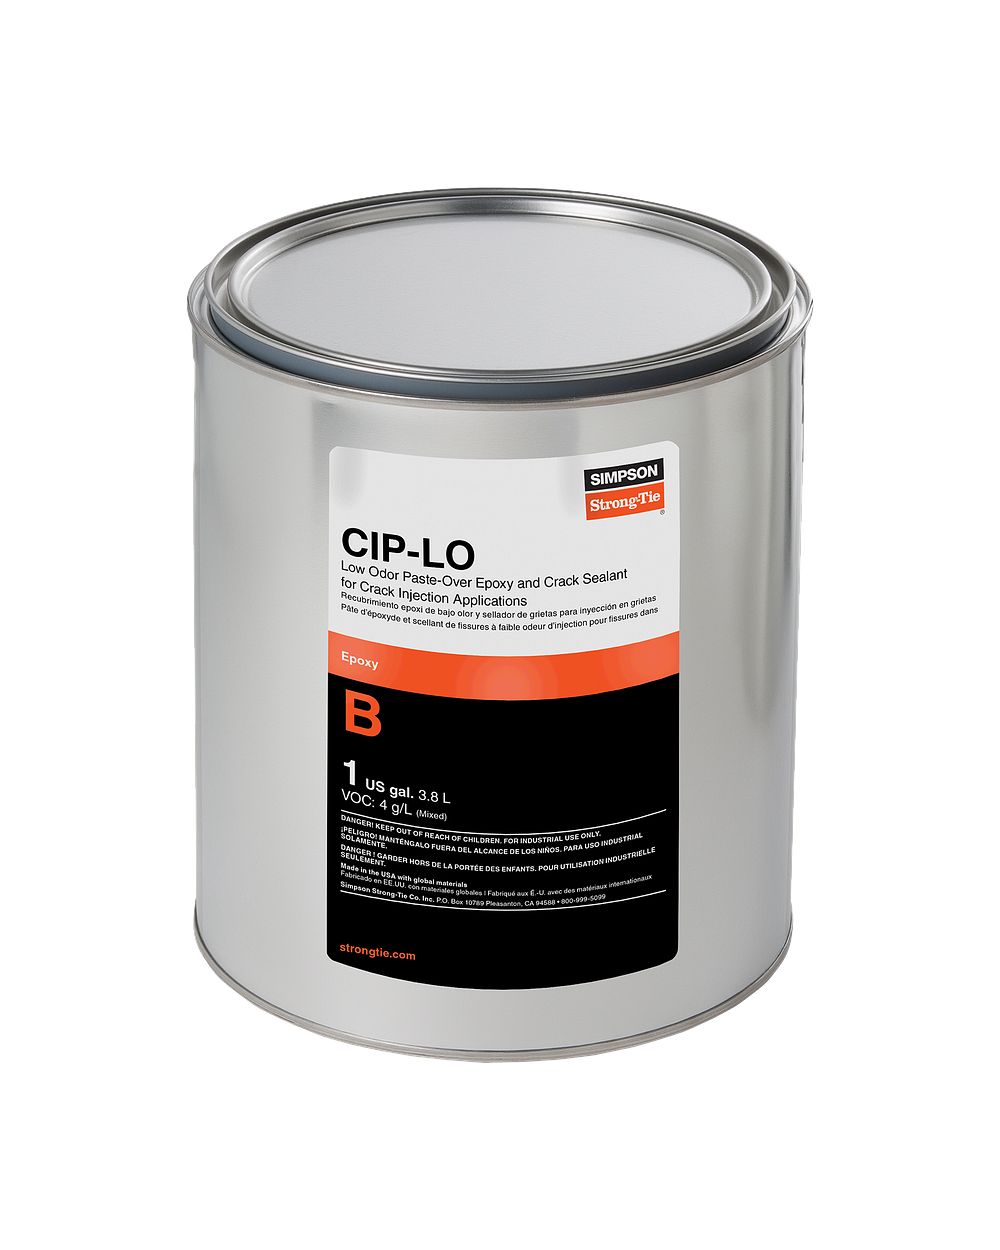 Simpson Strong-Tie CIPLO2KT Low-Odor Crack-Injection Paste-Over Epoxy and Crack Sealant, 2 Gallon kit